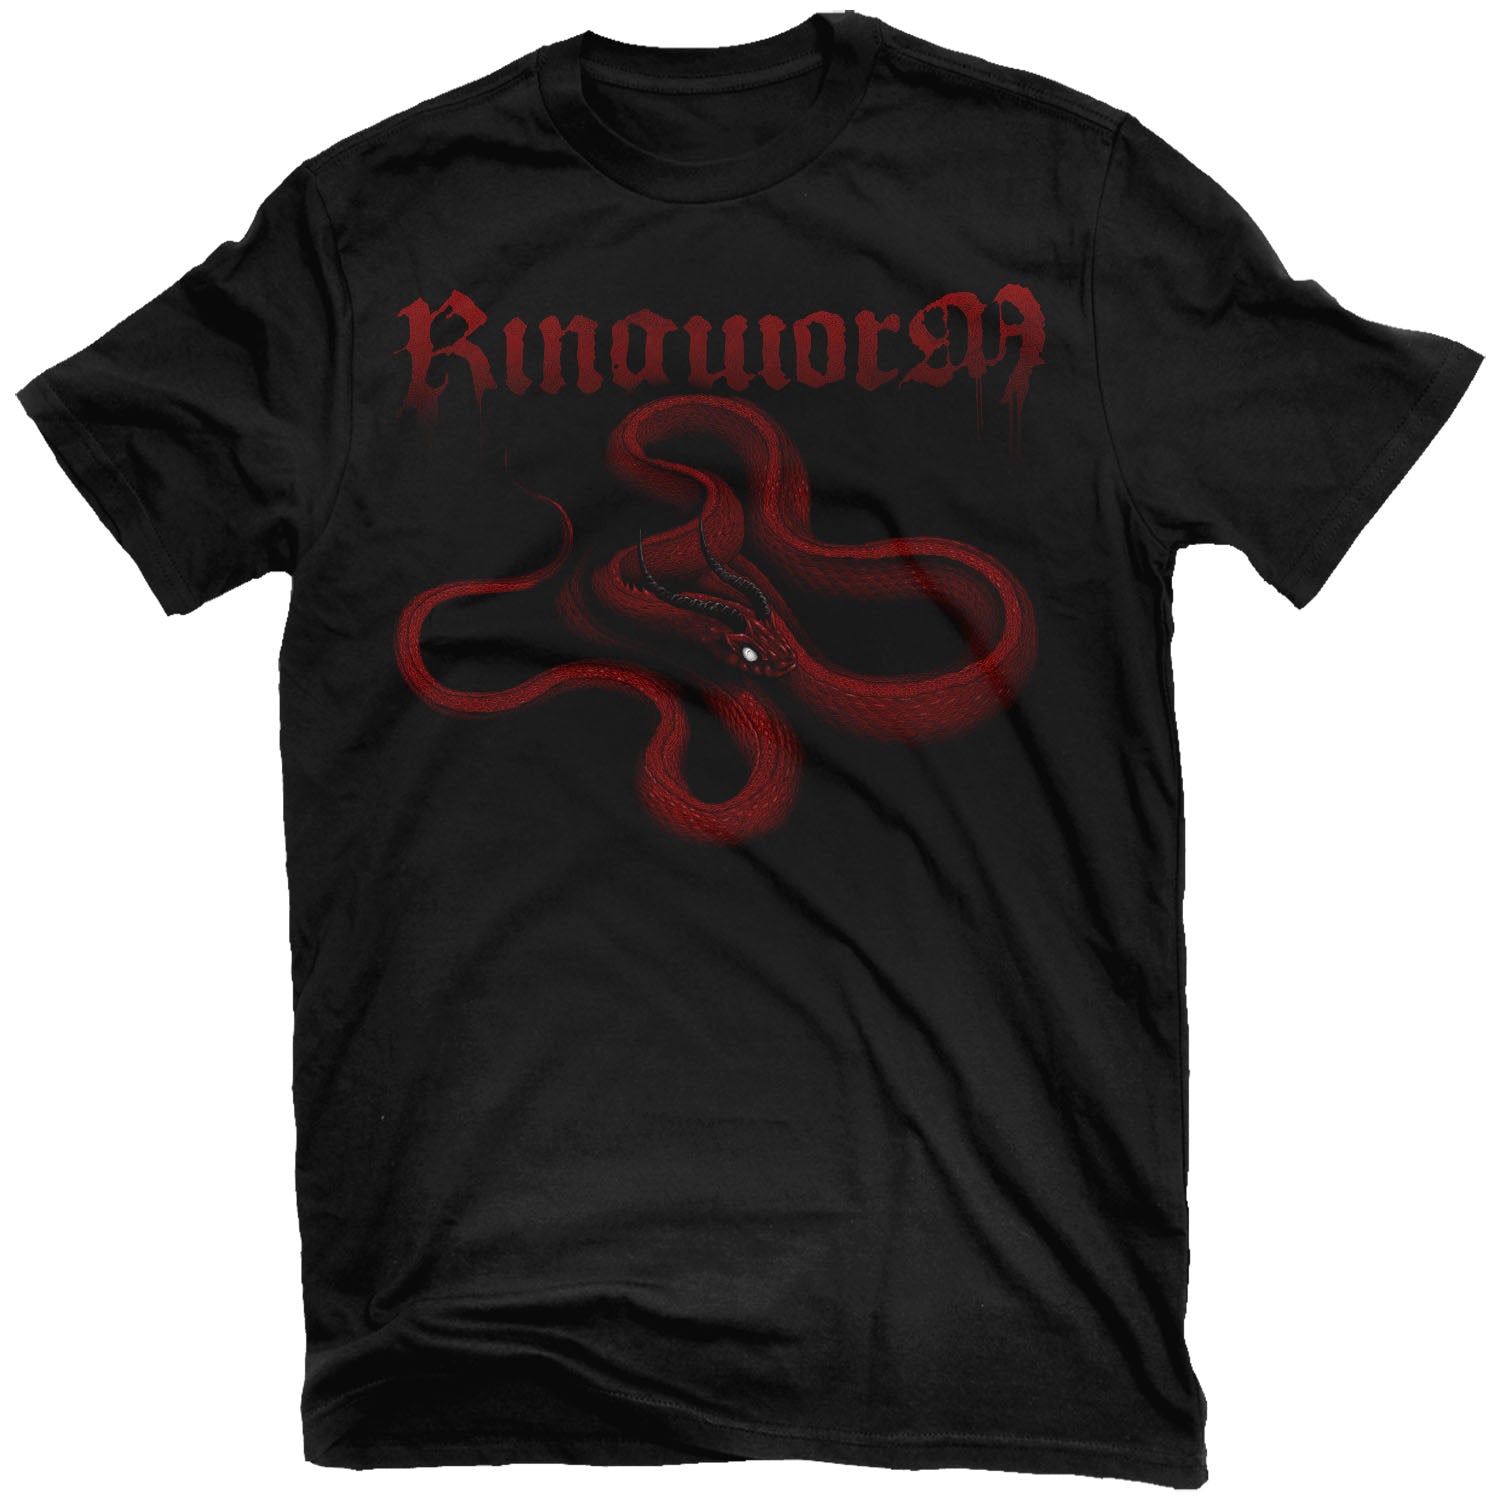 Ringworm "Death Becomes My Voice" T-Shirt